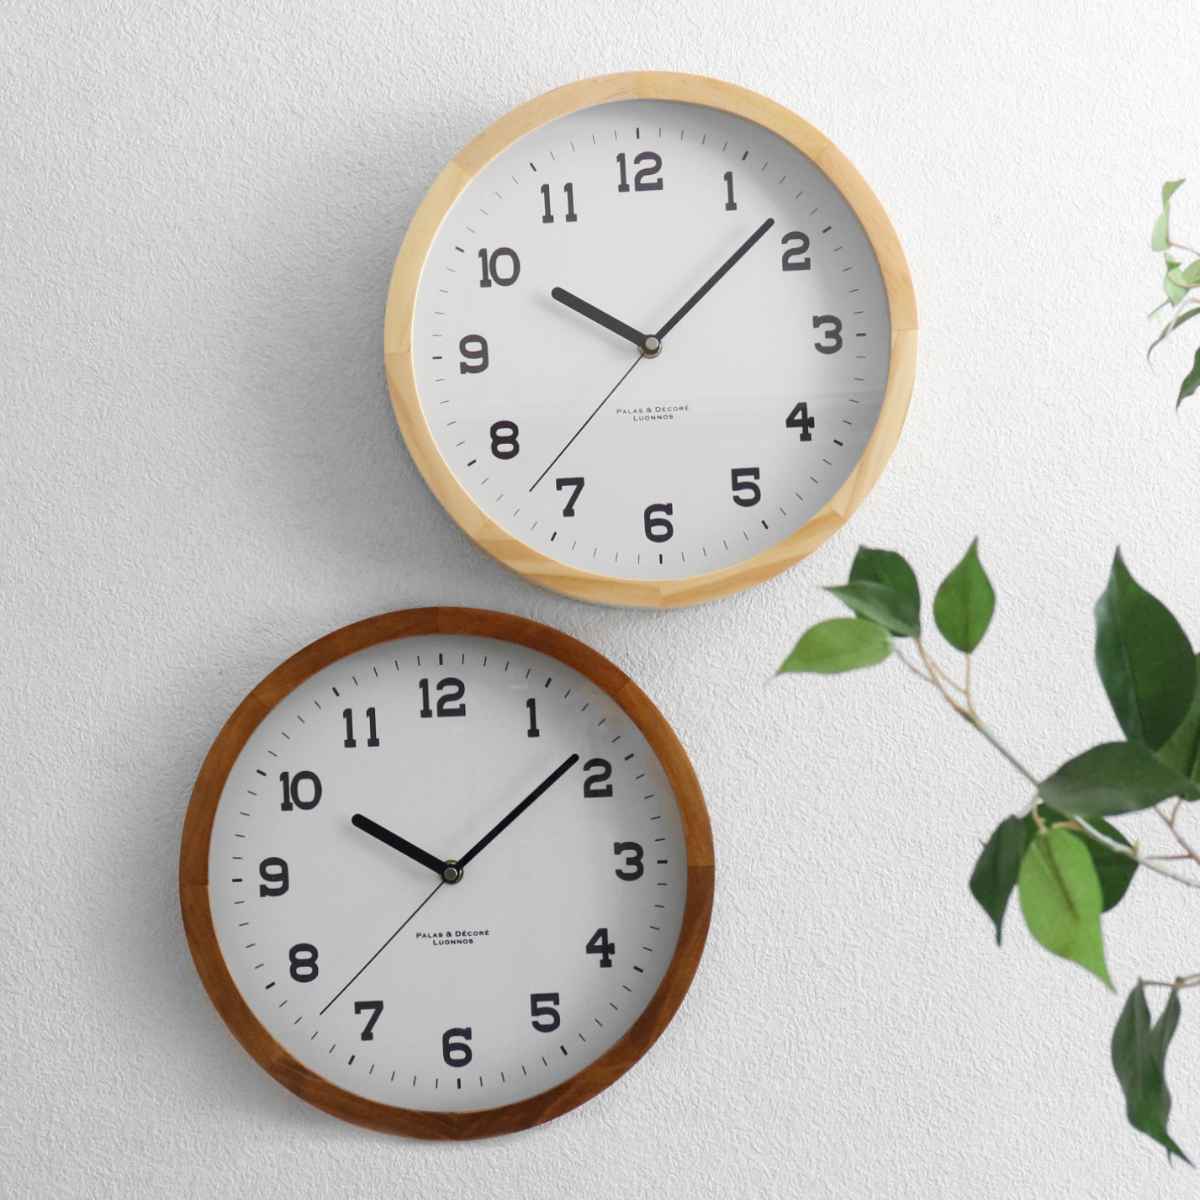 nepenthes ネペンテス 壁掛け時計 wall clock - その他